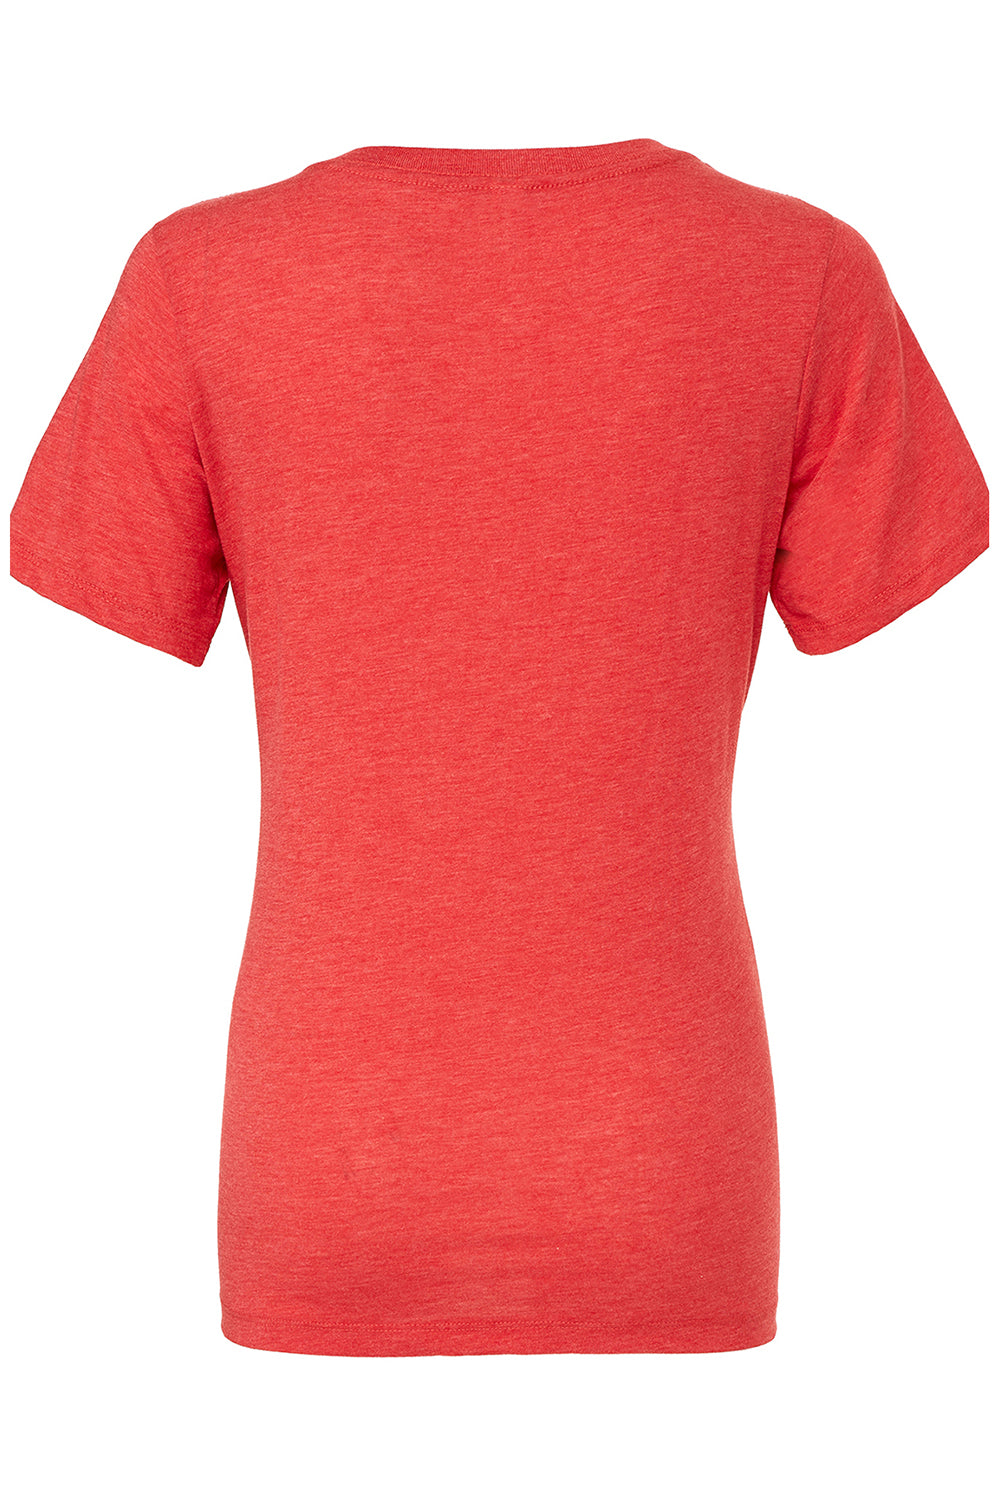 Bella + Canvas BC6405/6405 Womens Relaxed Jersey Short Sleeve V-Neck T-Shirt Red Triblend Flat Back